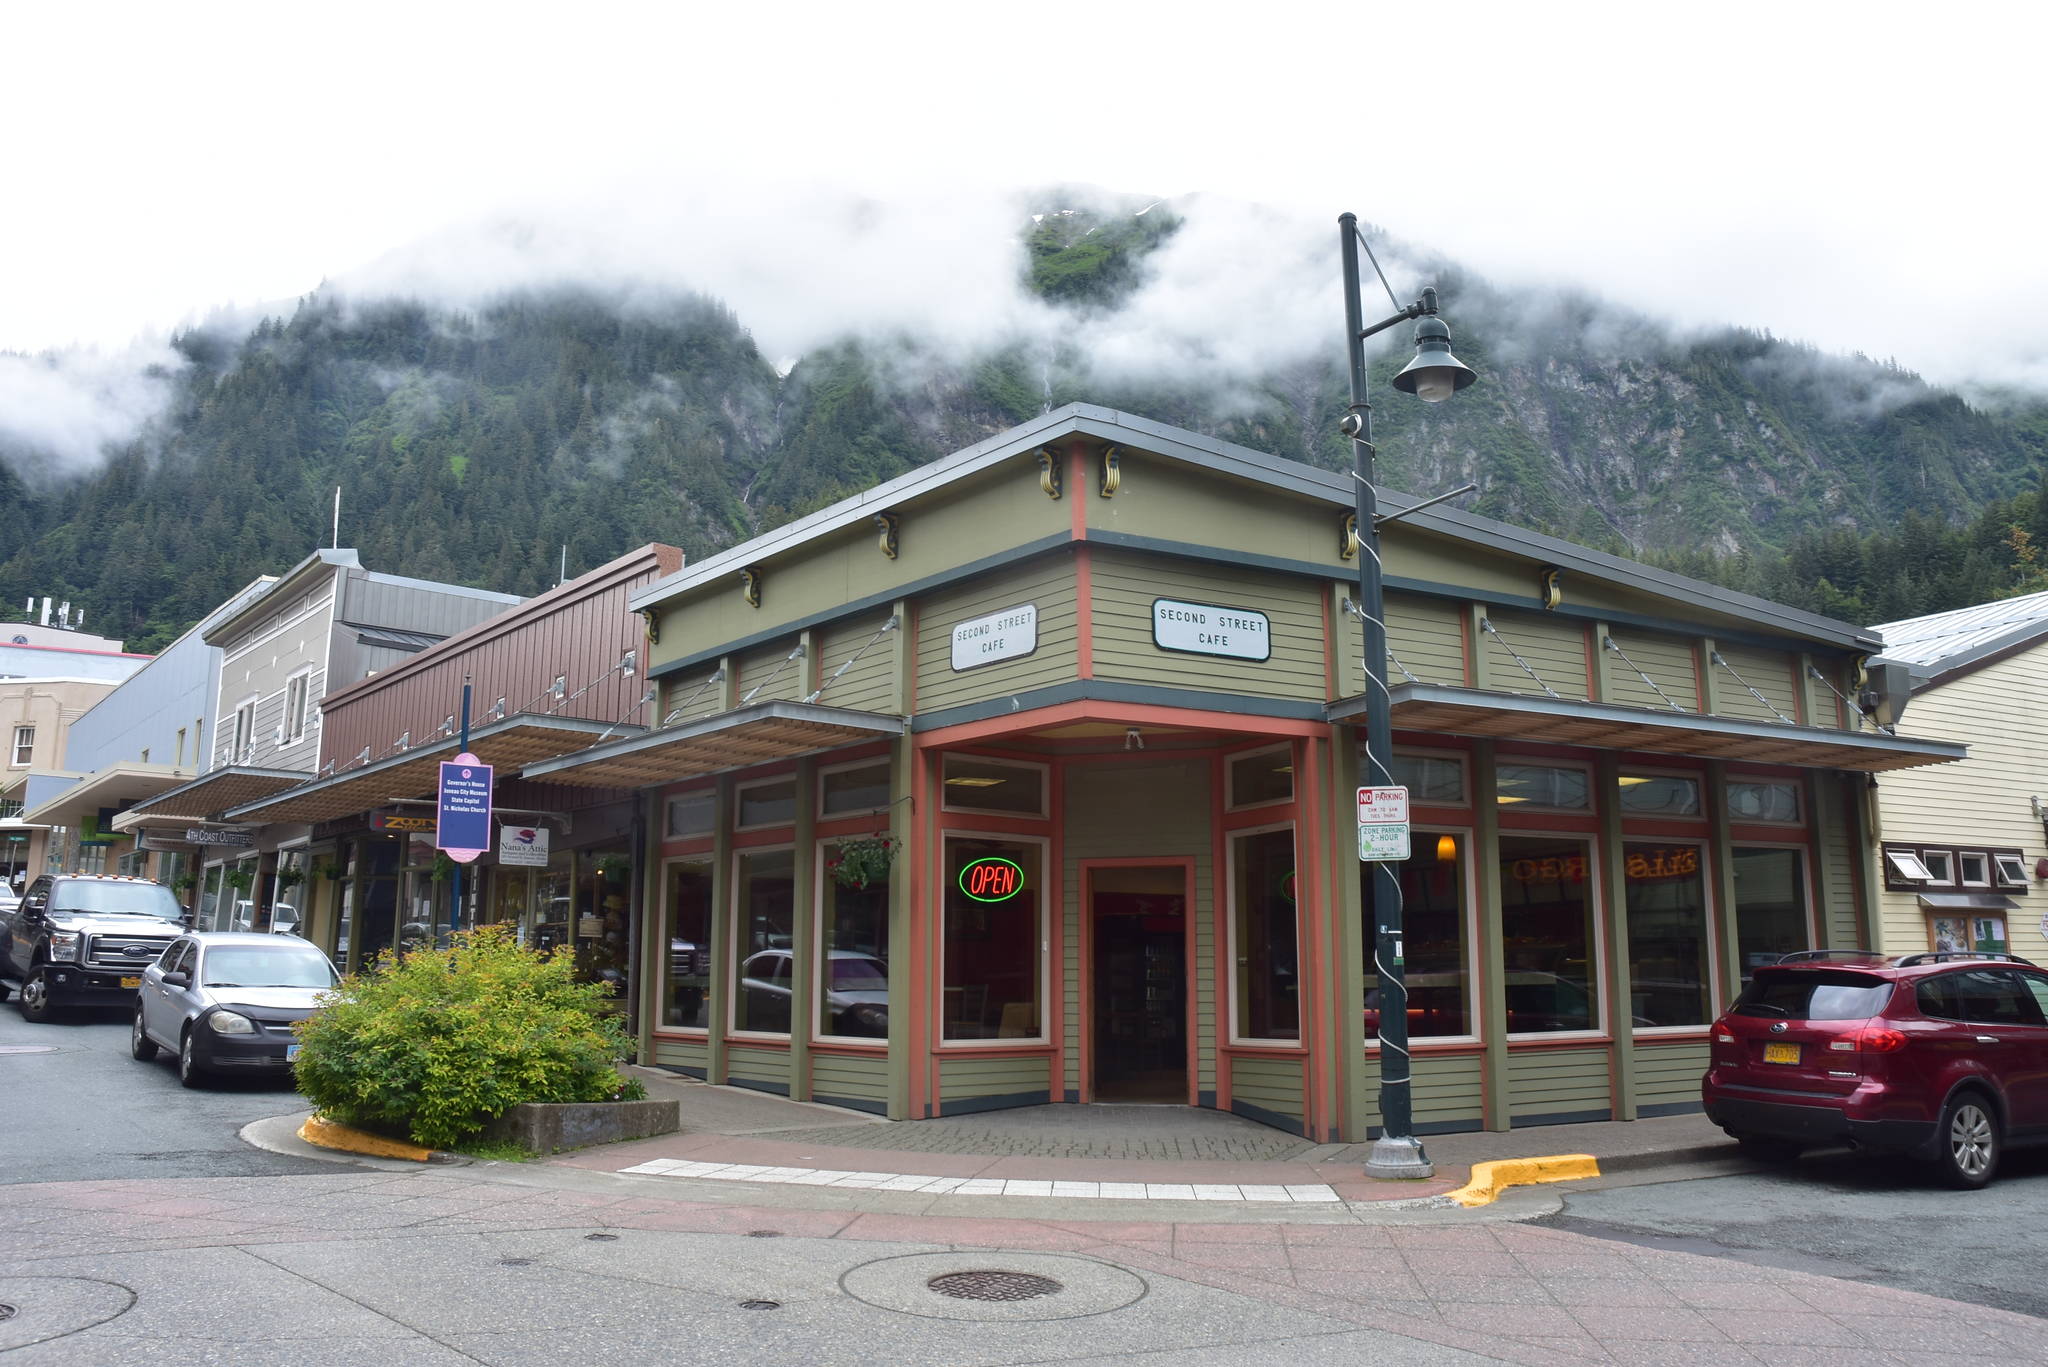 Second Street Cafe has its doors open for a trial run Monday, in the location where a Subway restaurant used to be. Owner Don Morgan says he always wanted to open a restaurant and took the opportunity when it presented itself. Monday, June 27, 2020. (Peter Segall | Juneau Empire)